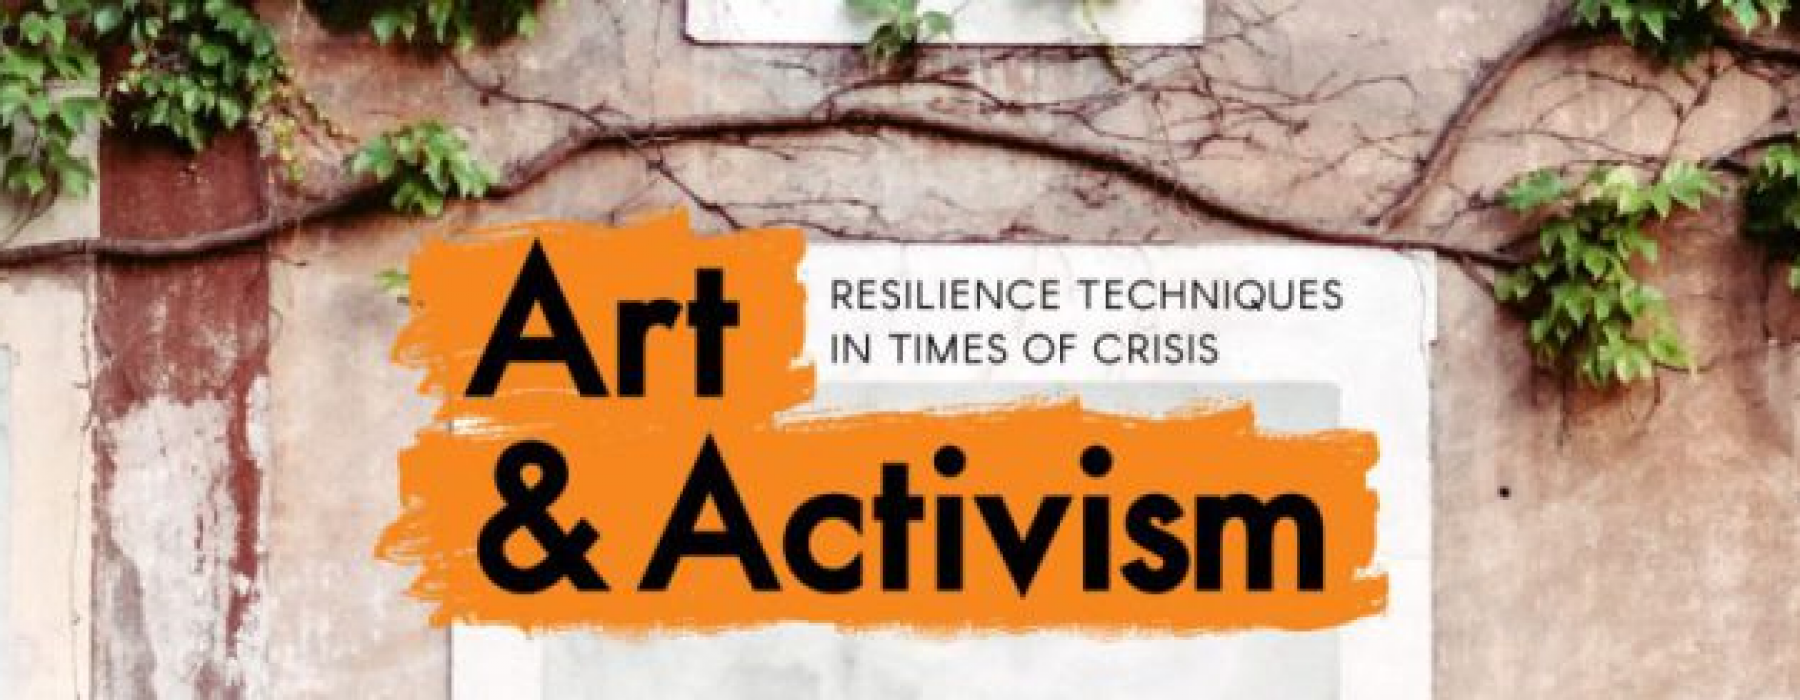 Art & Activism - Research Center for Material Culture